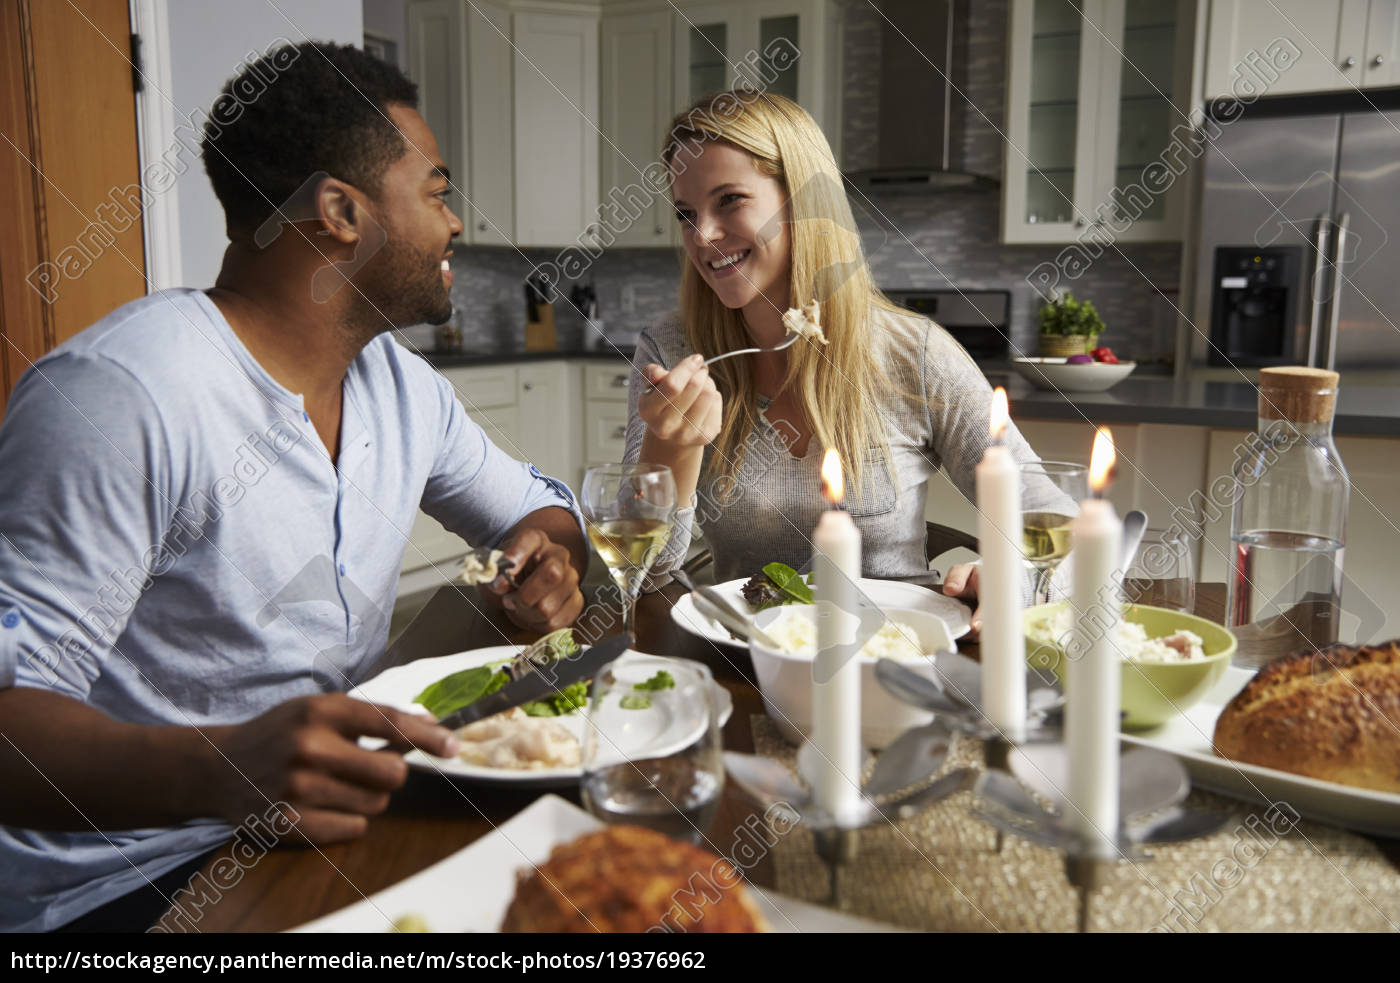 Romantic Mixed Race Couple Eating Evening Meal In Stock Image